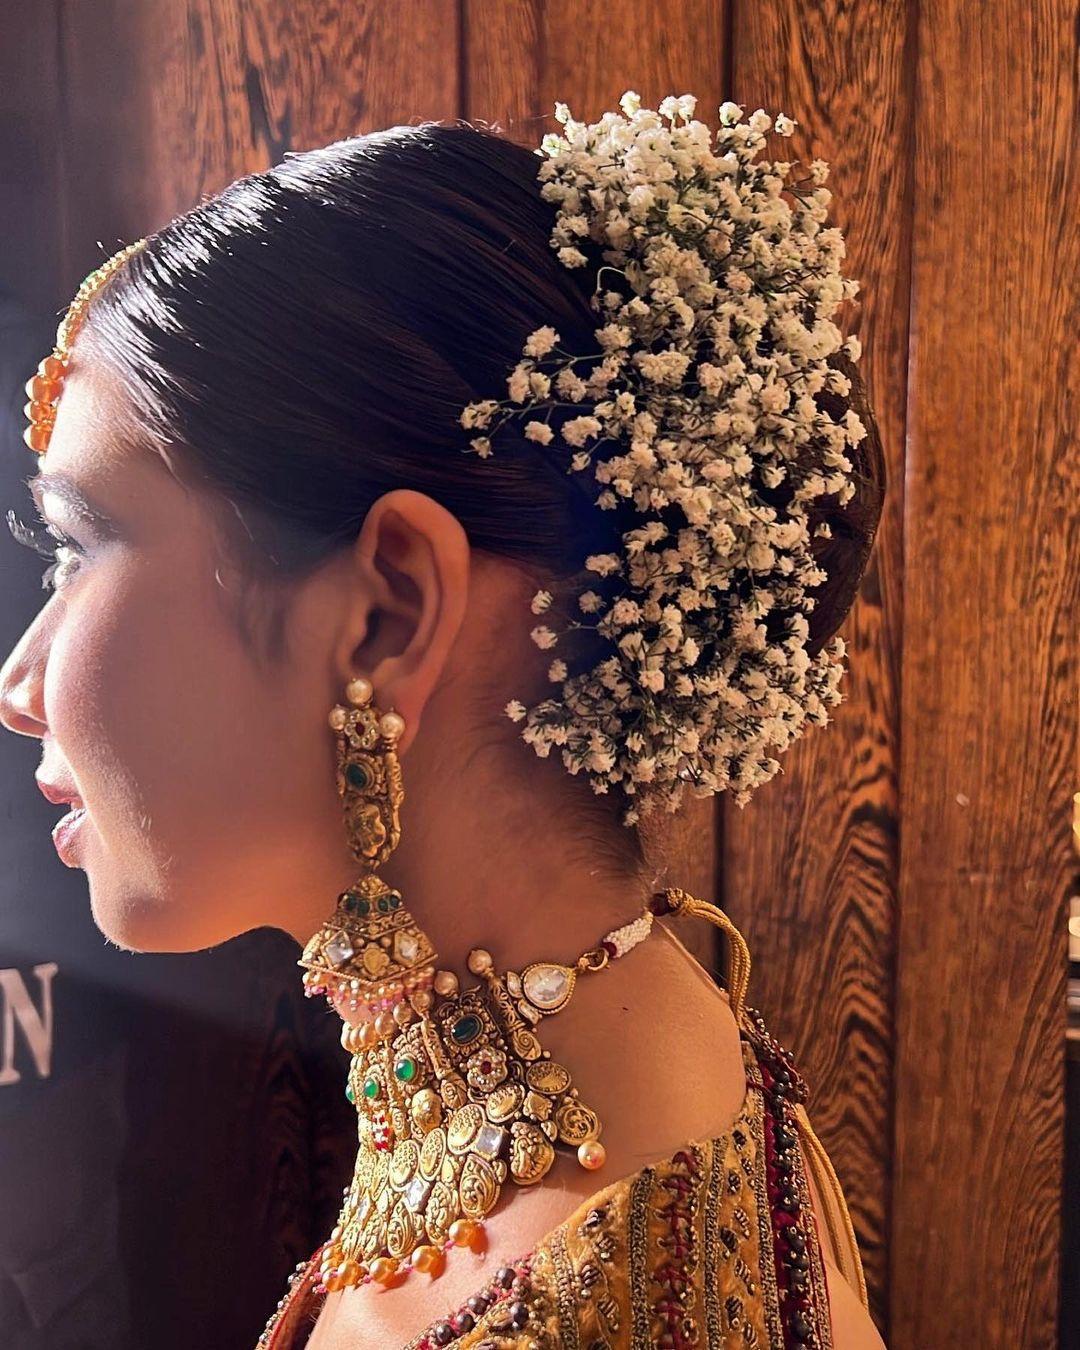 Tying the knot? Bookmark these 8 stunning bun bridal hairstyles for weddings !